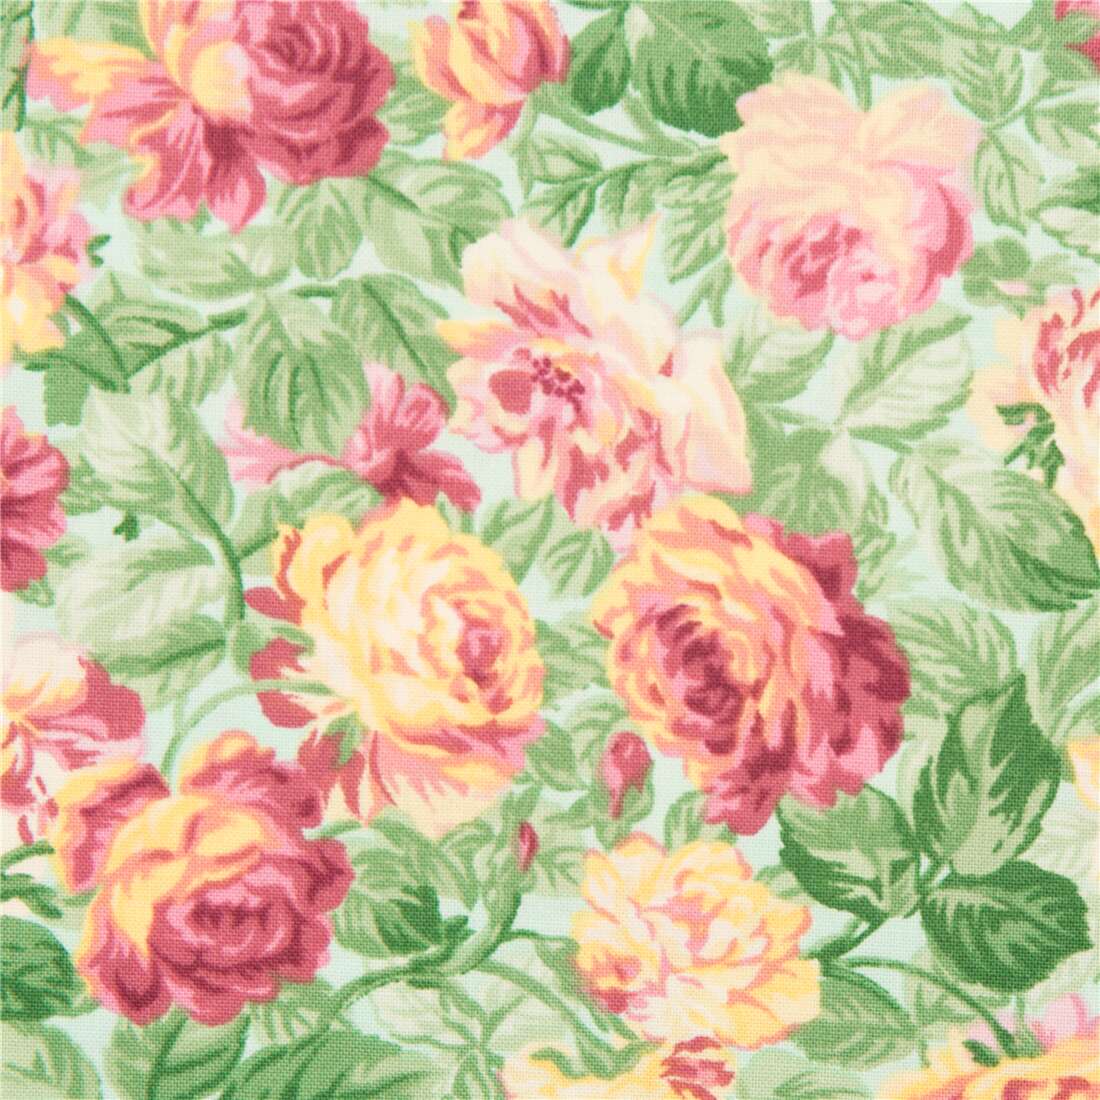 100% Cotton Fabric 1/2 yard, RED and YELLOW ROSES